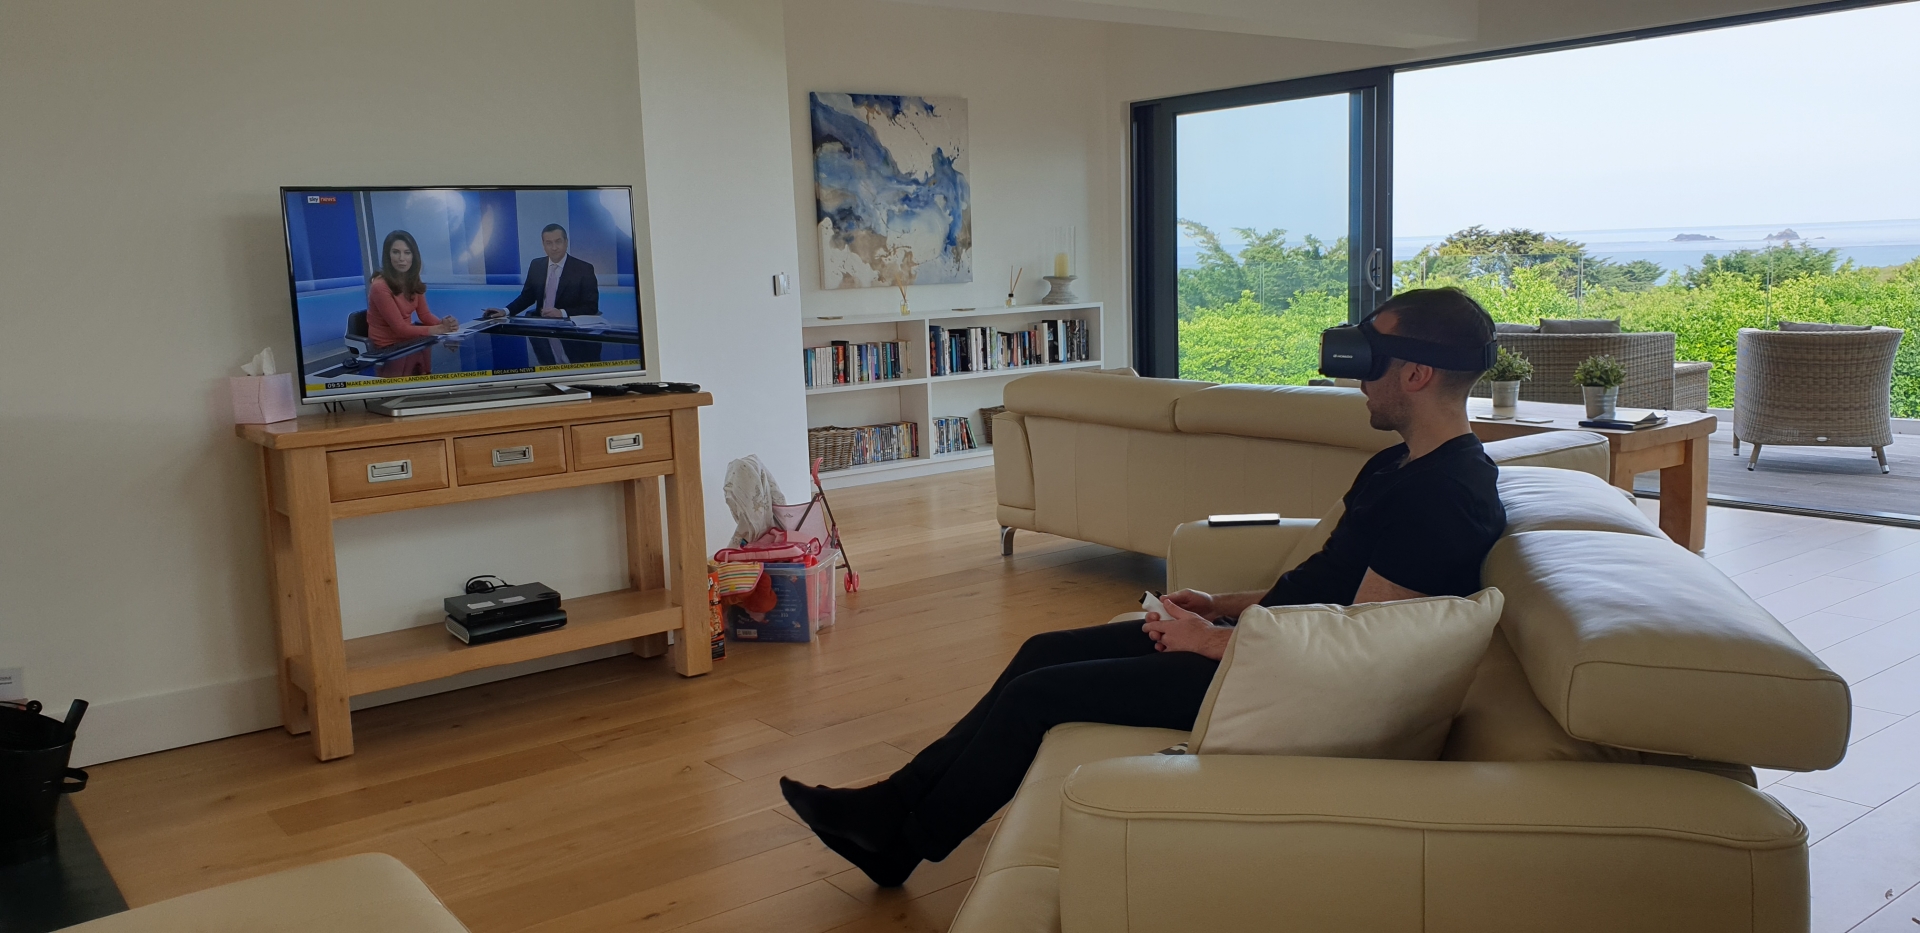 Minimising time lag is vital to make augmented reality headsets comfortable to use, including for activities such as watching television.